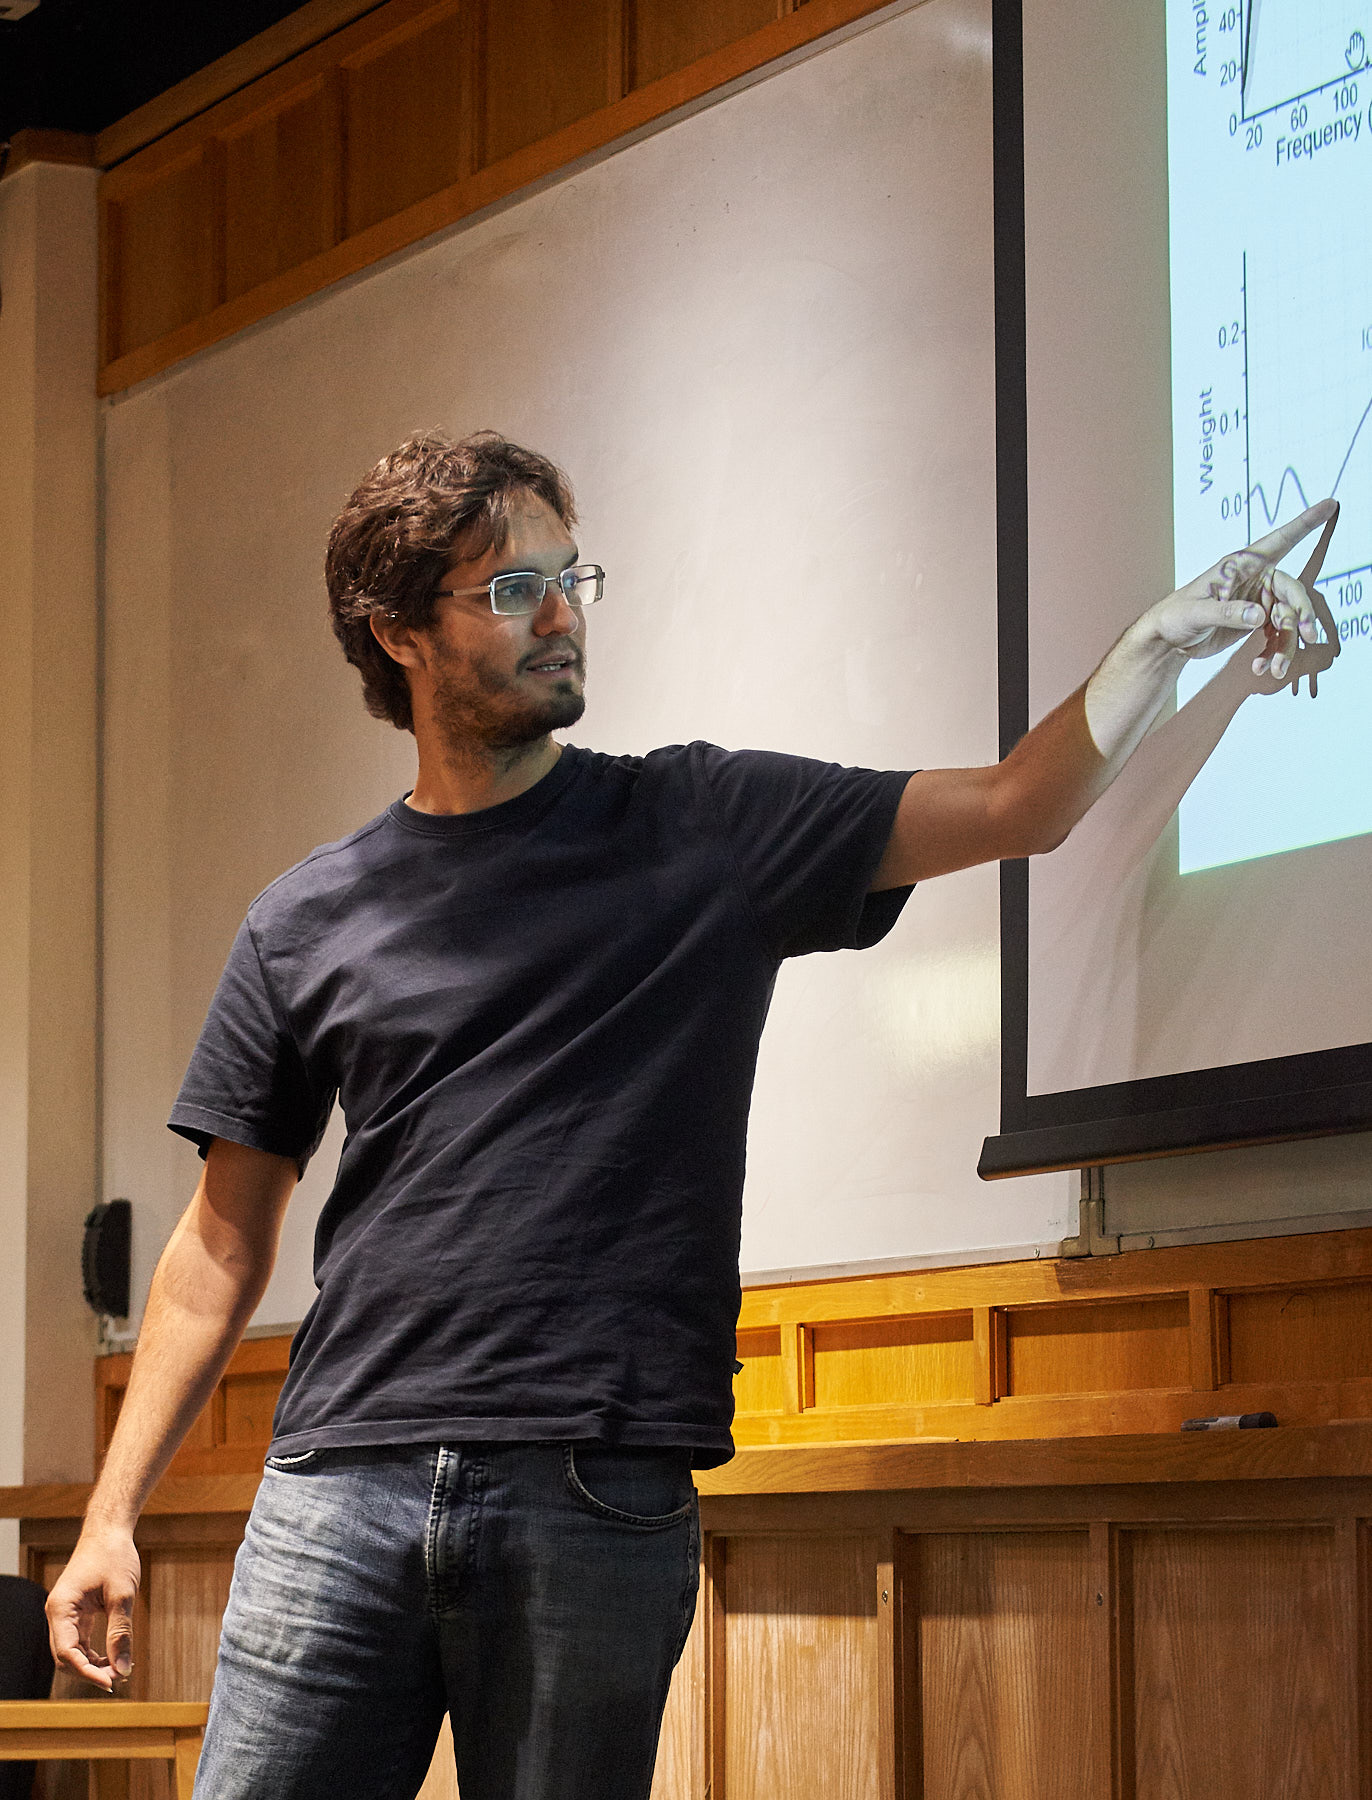 Unit postdoctoral scientist Vitor Lopes dos Santos sheds new light on the parsing of hippocampal oscillations.